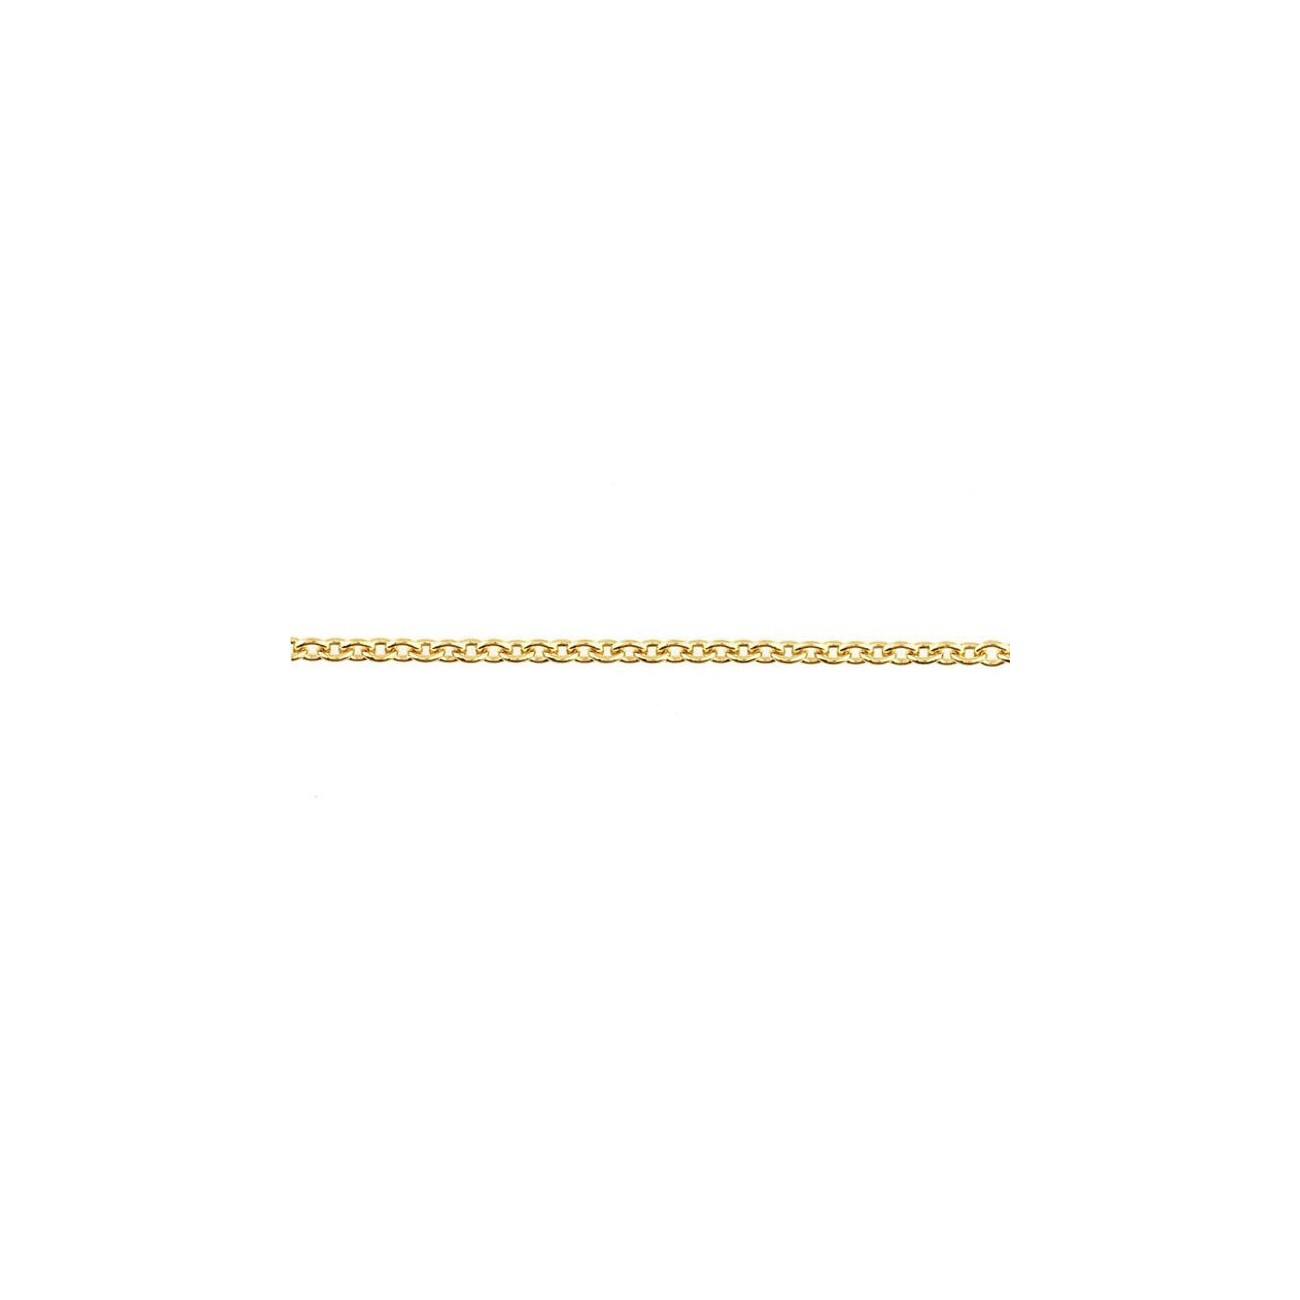 CADENA GOLD FILLED CABLE OVAL 1,30MM (1 CM)